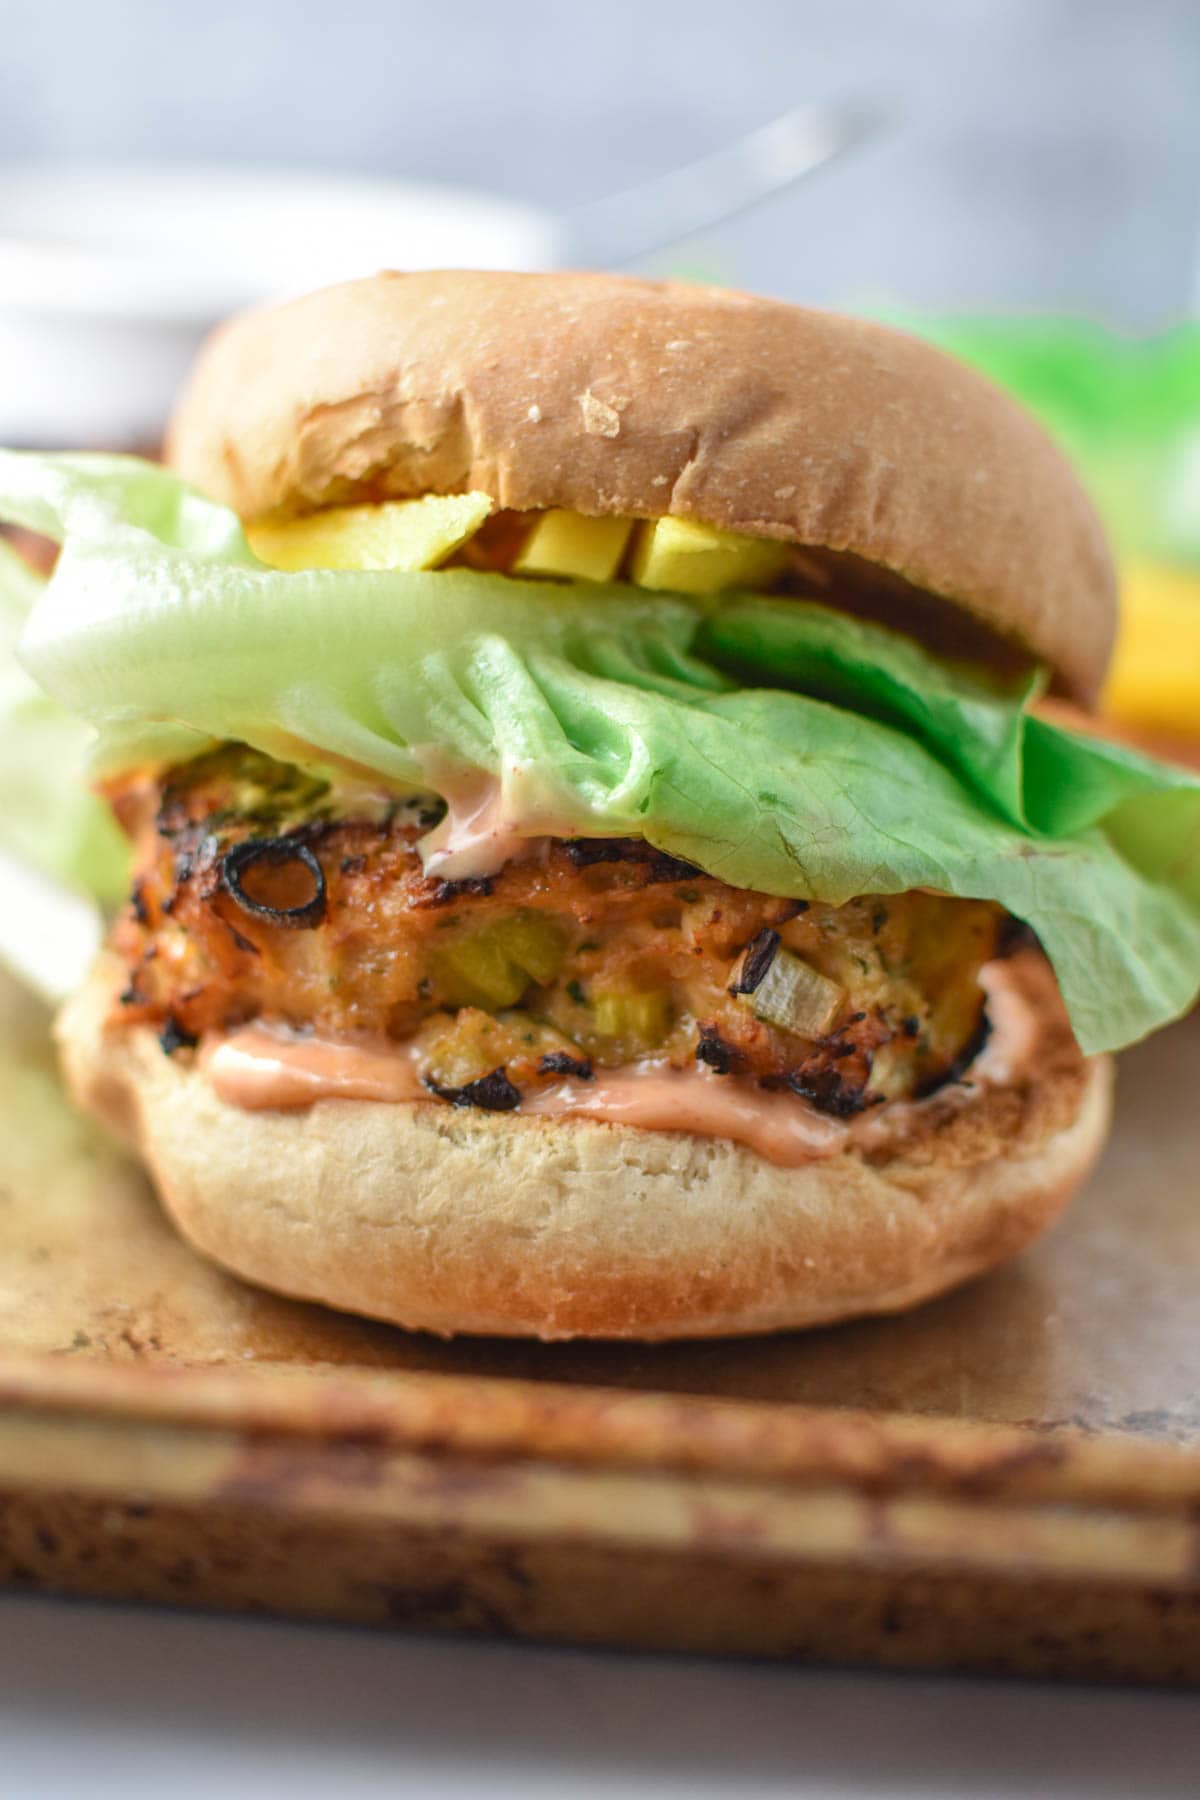 A teriyaki chicken burger with butter lettuce and spicy mayo.